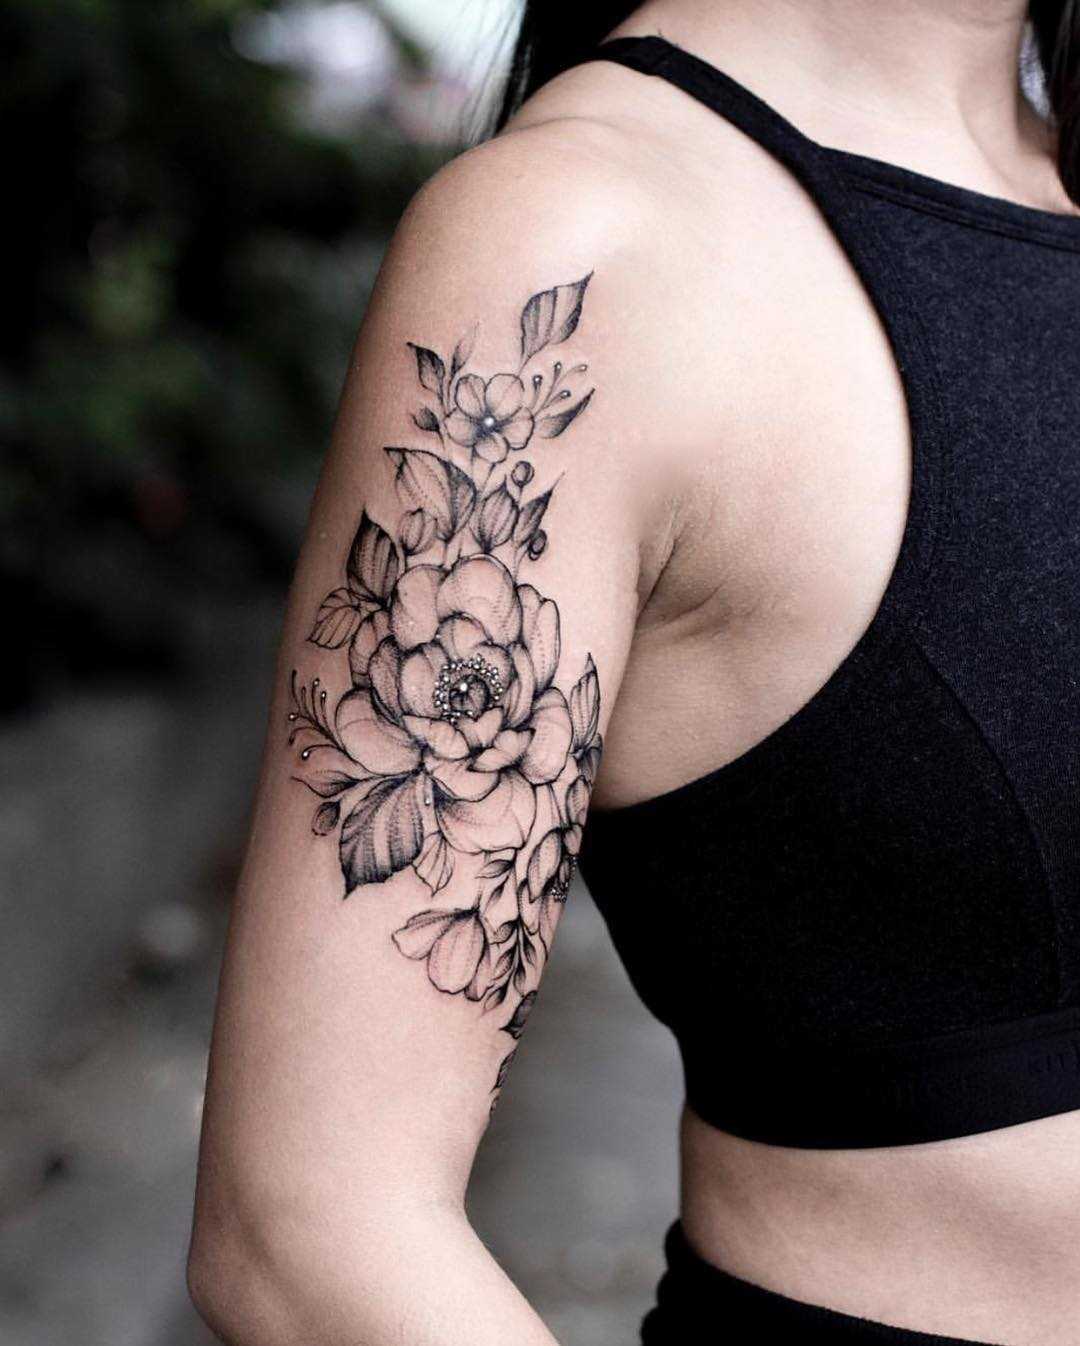 Black floral piece on the right arm - Tattoogrid.net